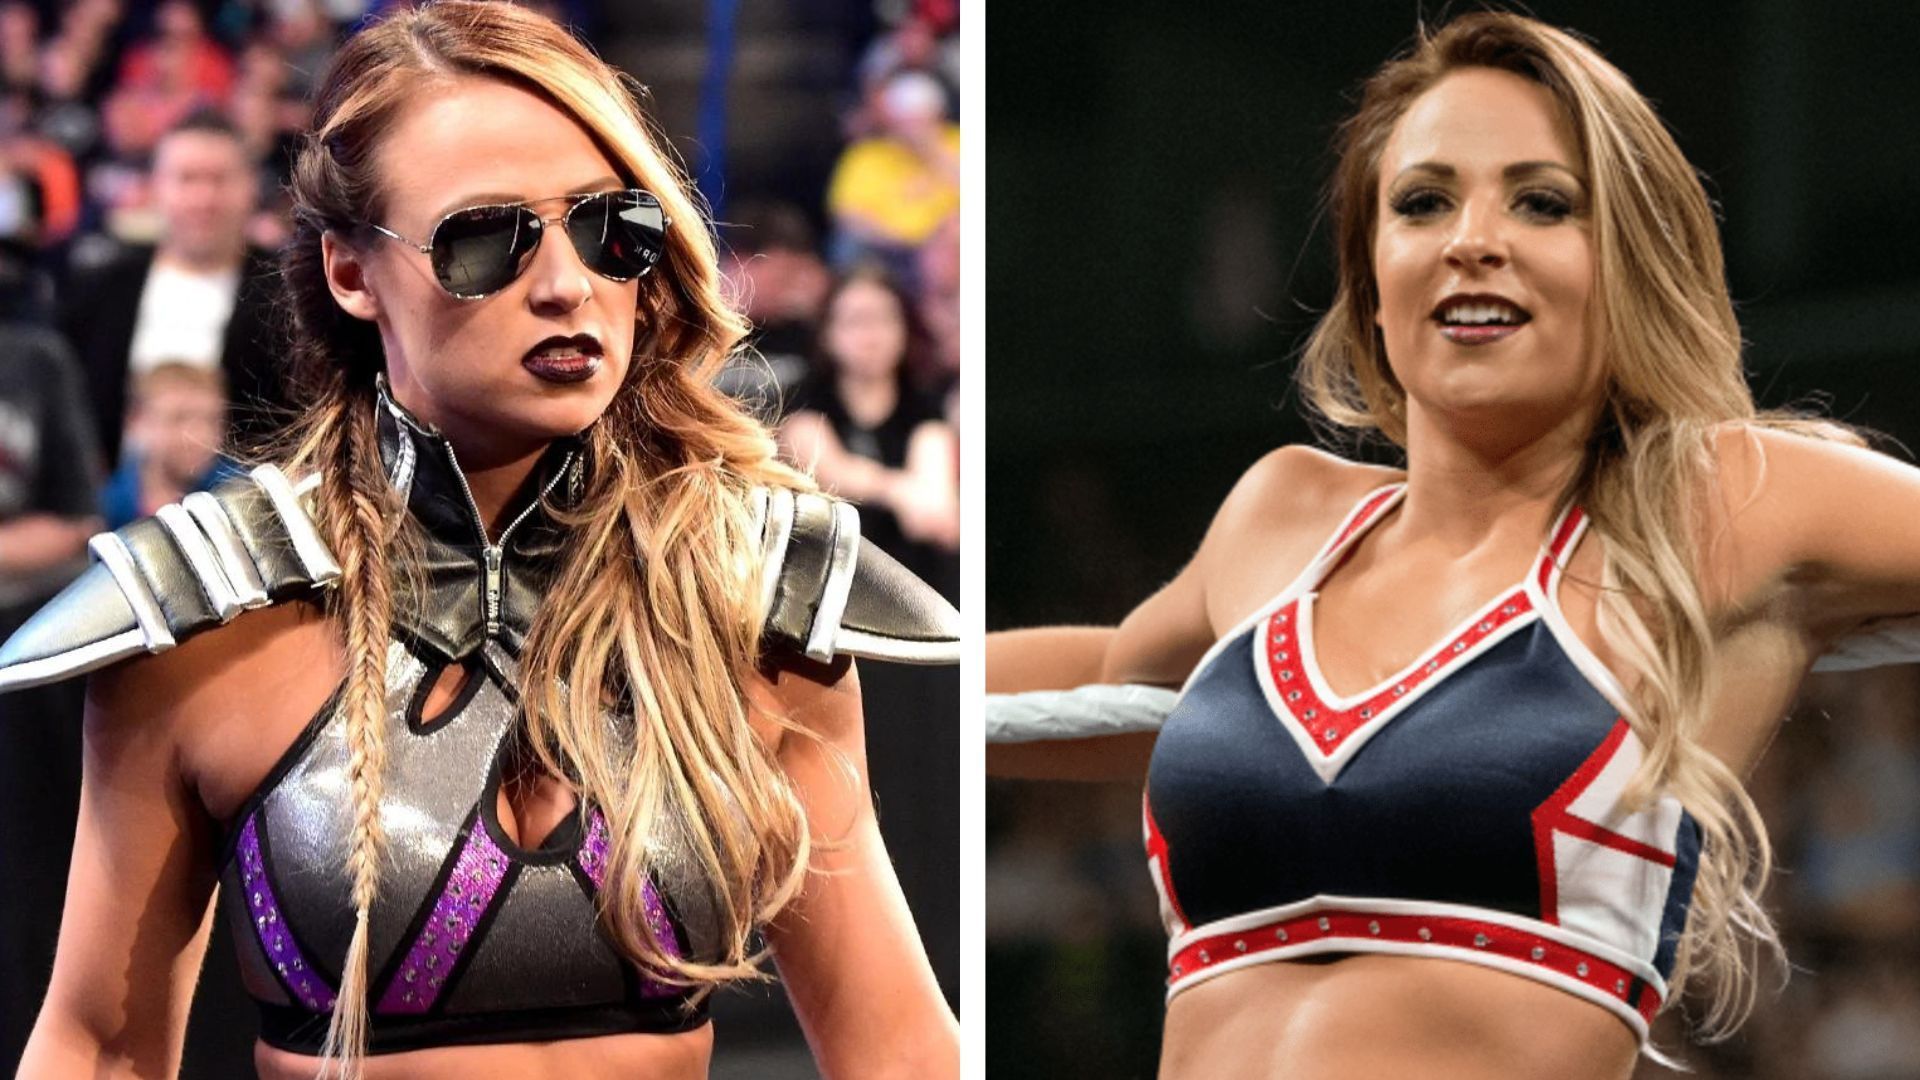 WWE Superstar Emma has been wrestling for over two decades